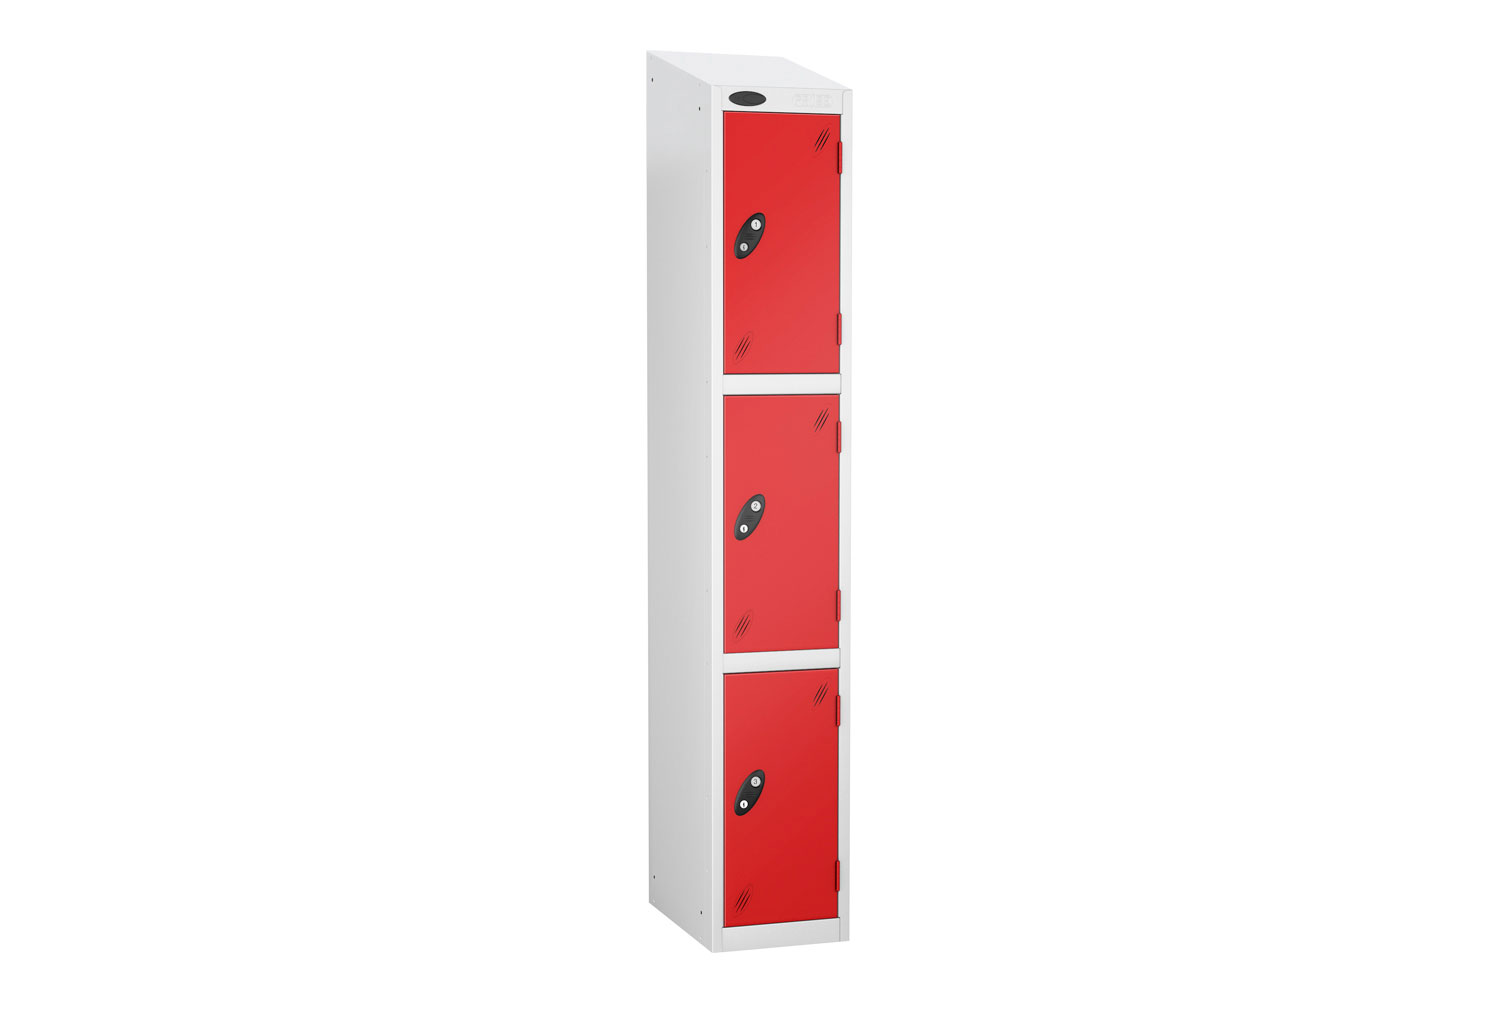 Probe Everyday 3 Door Locker With Sloping Top, 31wx38dx193h (cm), Hasp Lock, Silver Body, Red